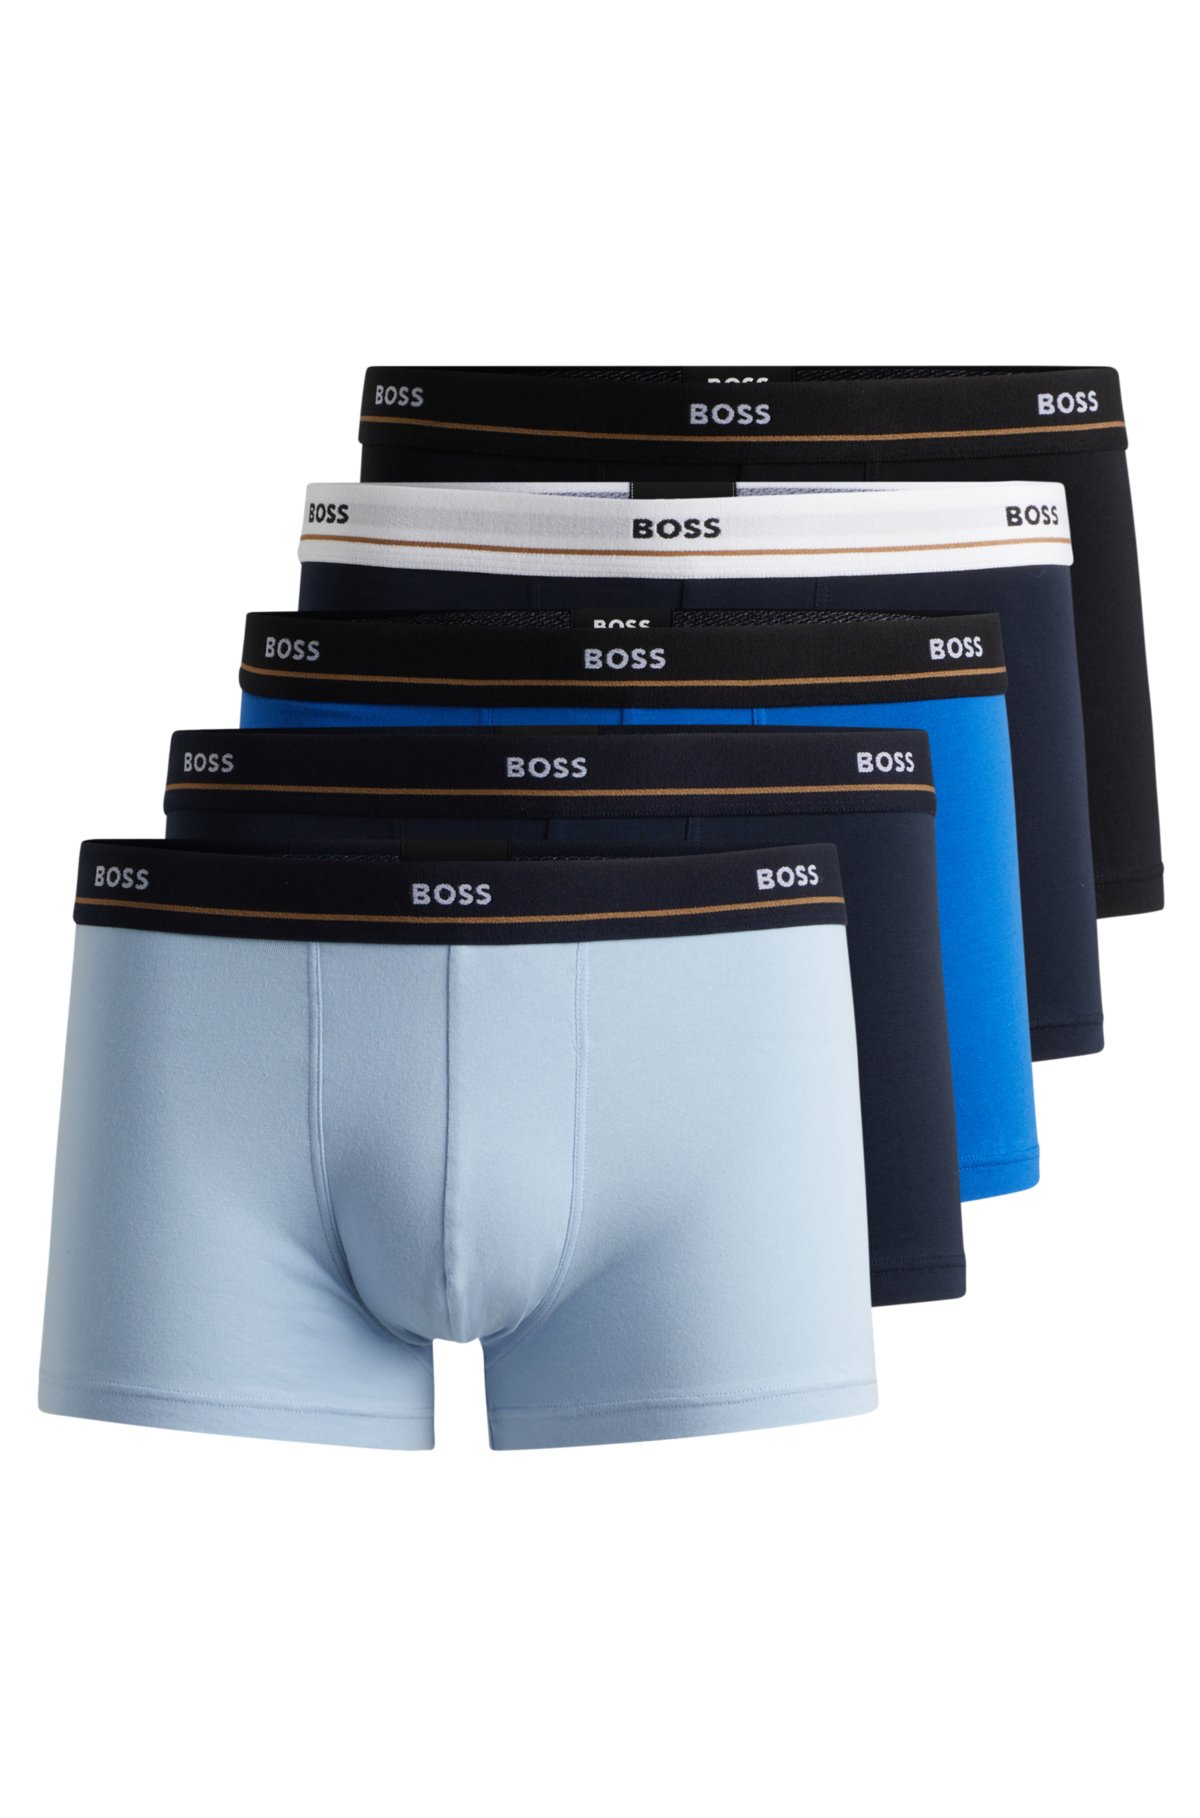 Pack of 5 Mens 95% Cotton Trunks Underwear (US size L) US Seller with Pocket